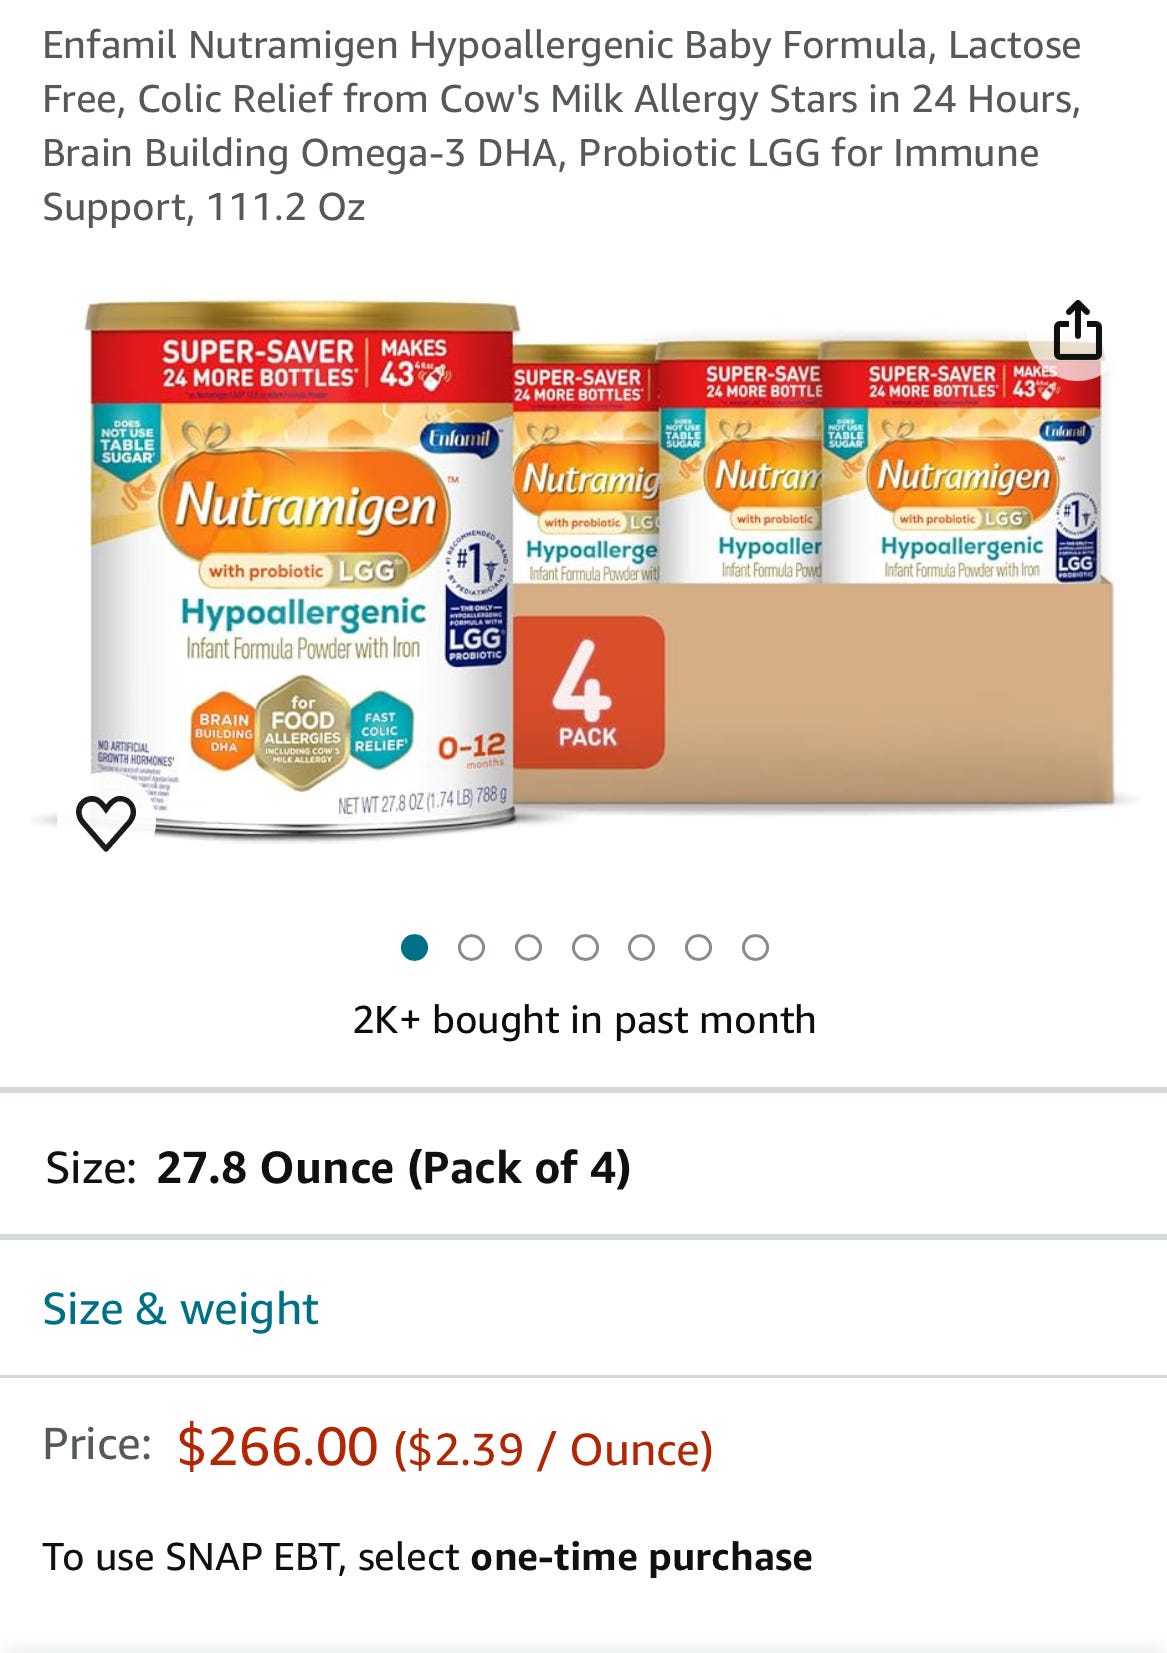 Baby Formula Prices [Whomst 229]